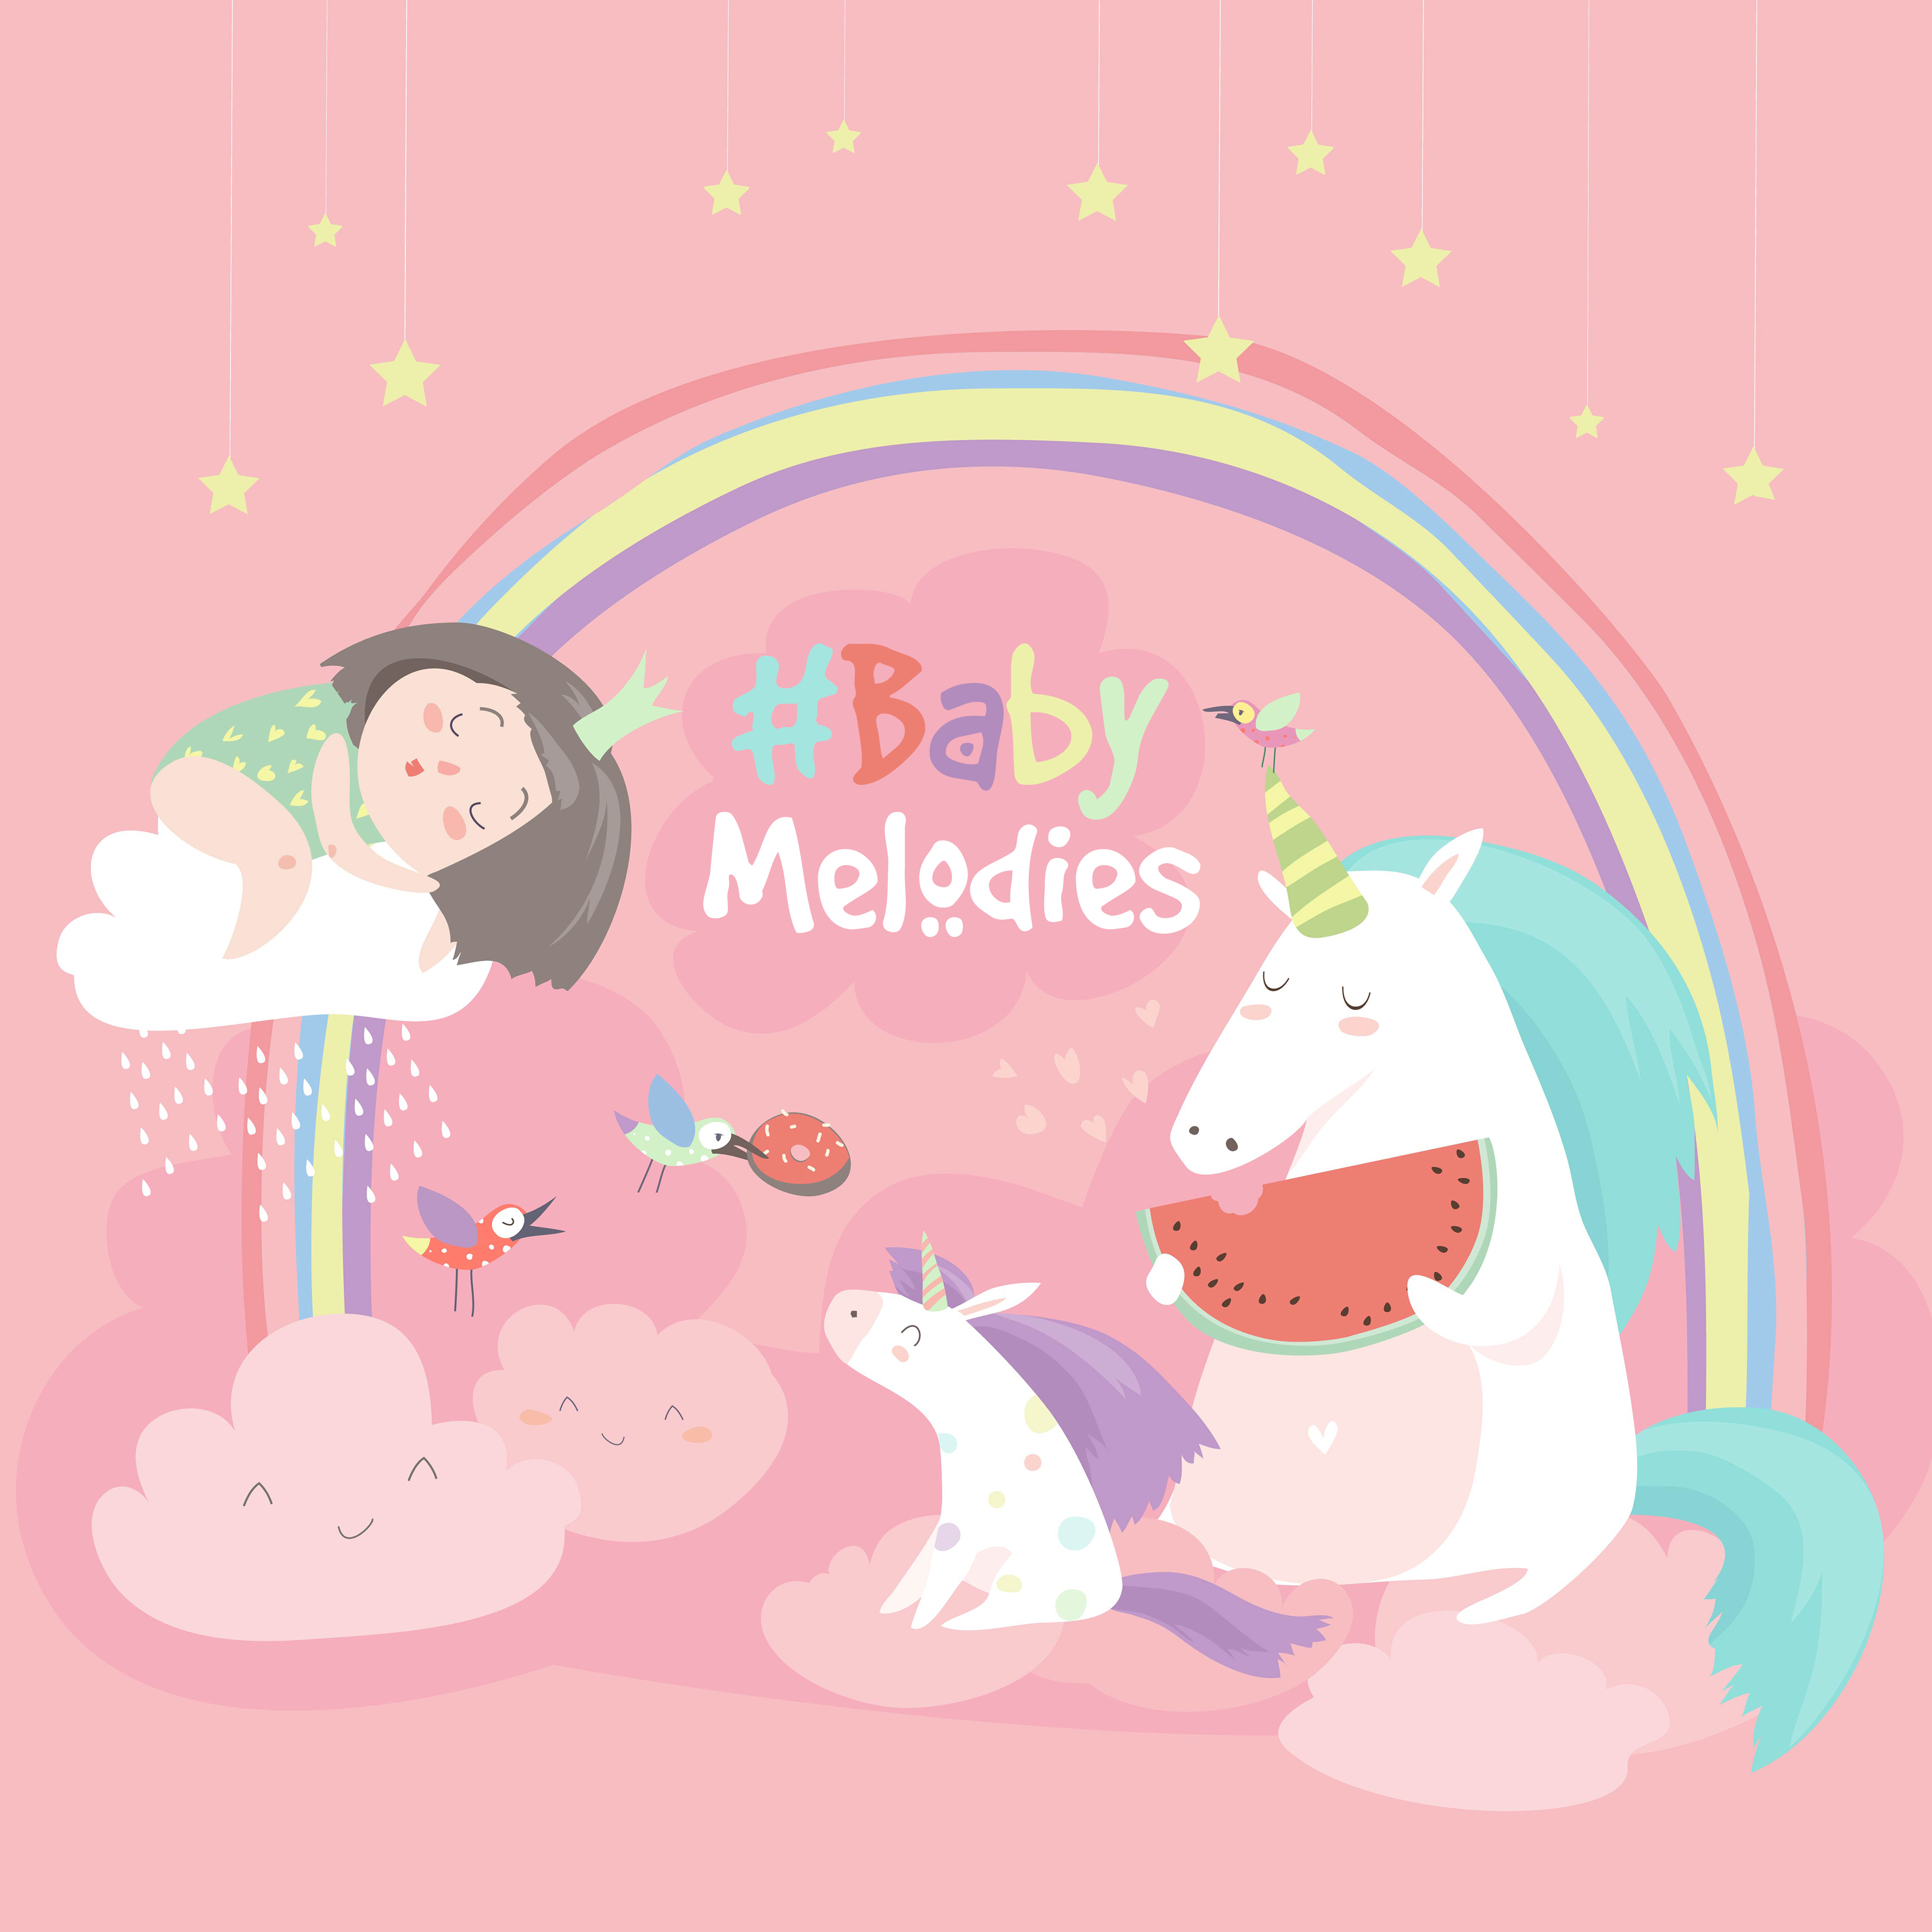 #Baby Melodies